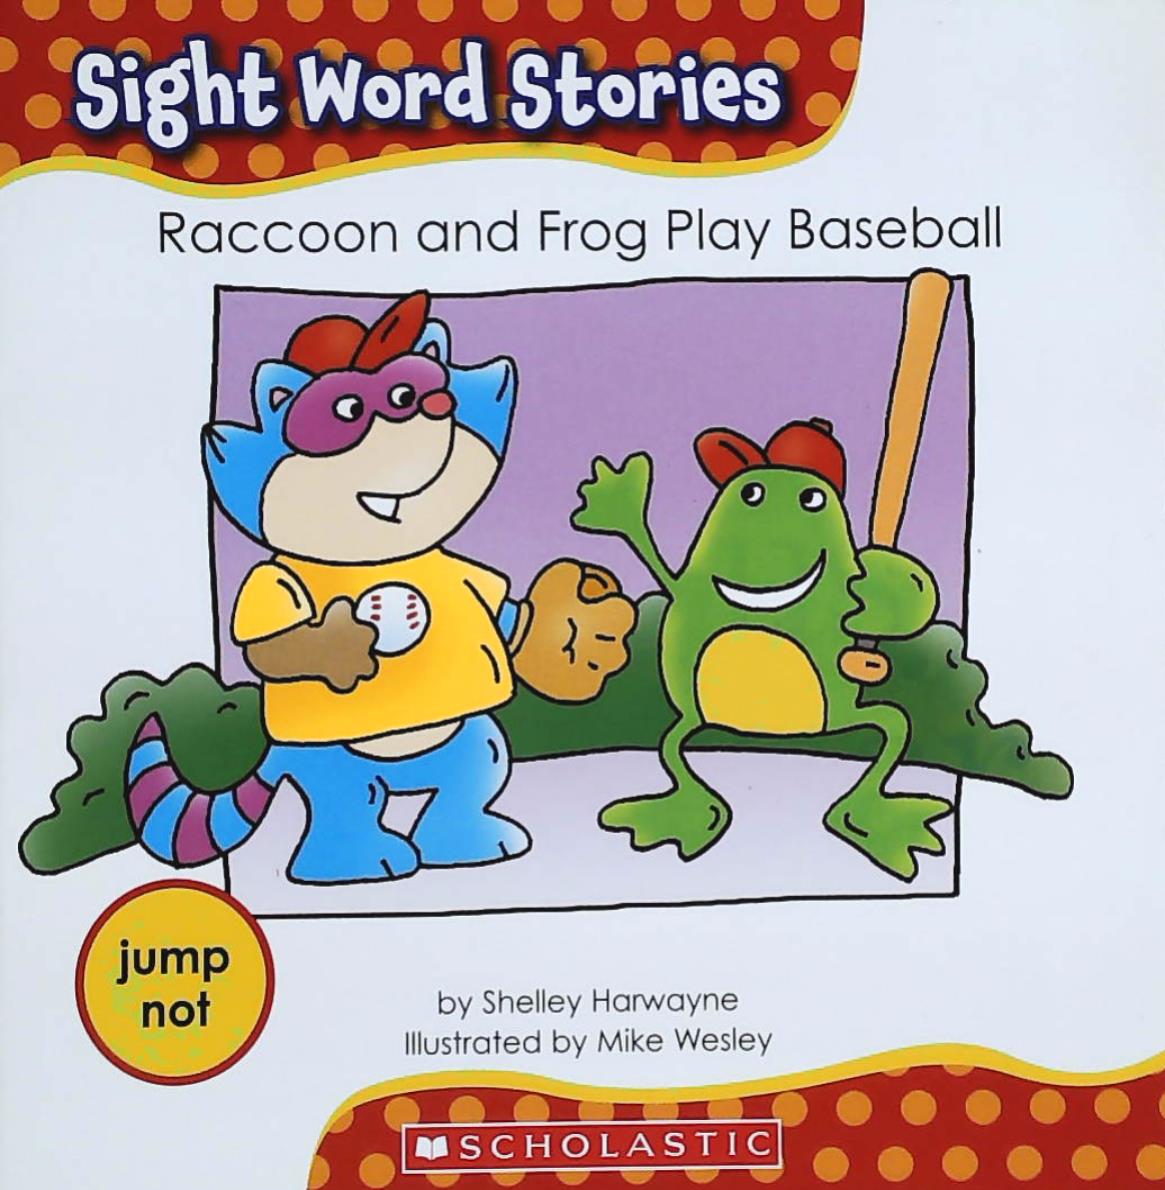 Livre ISBN 0545167671 Sight Word Stories : Racoon and Frog Play Baseball (Shelley Harwayne)